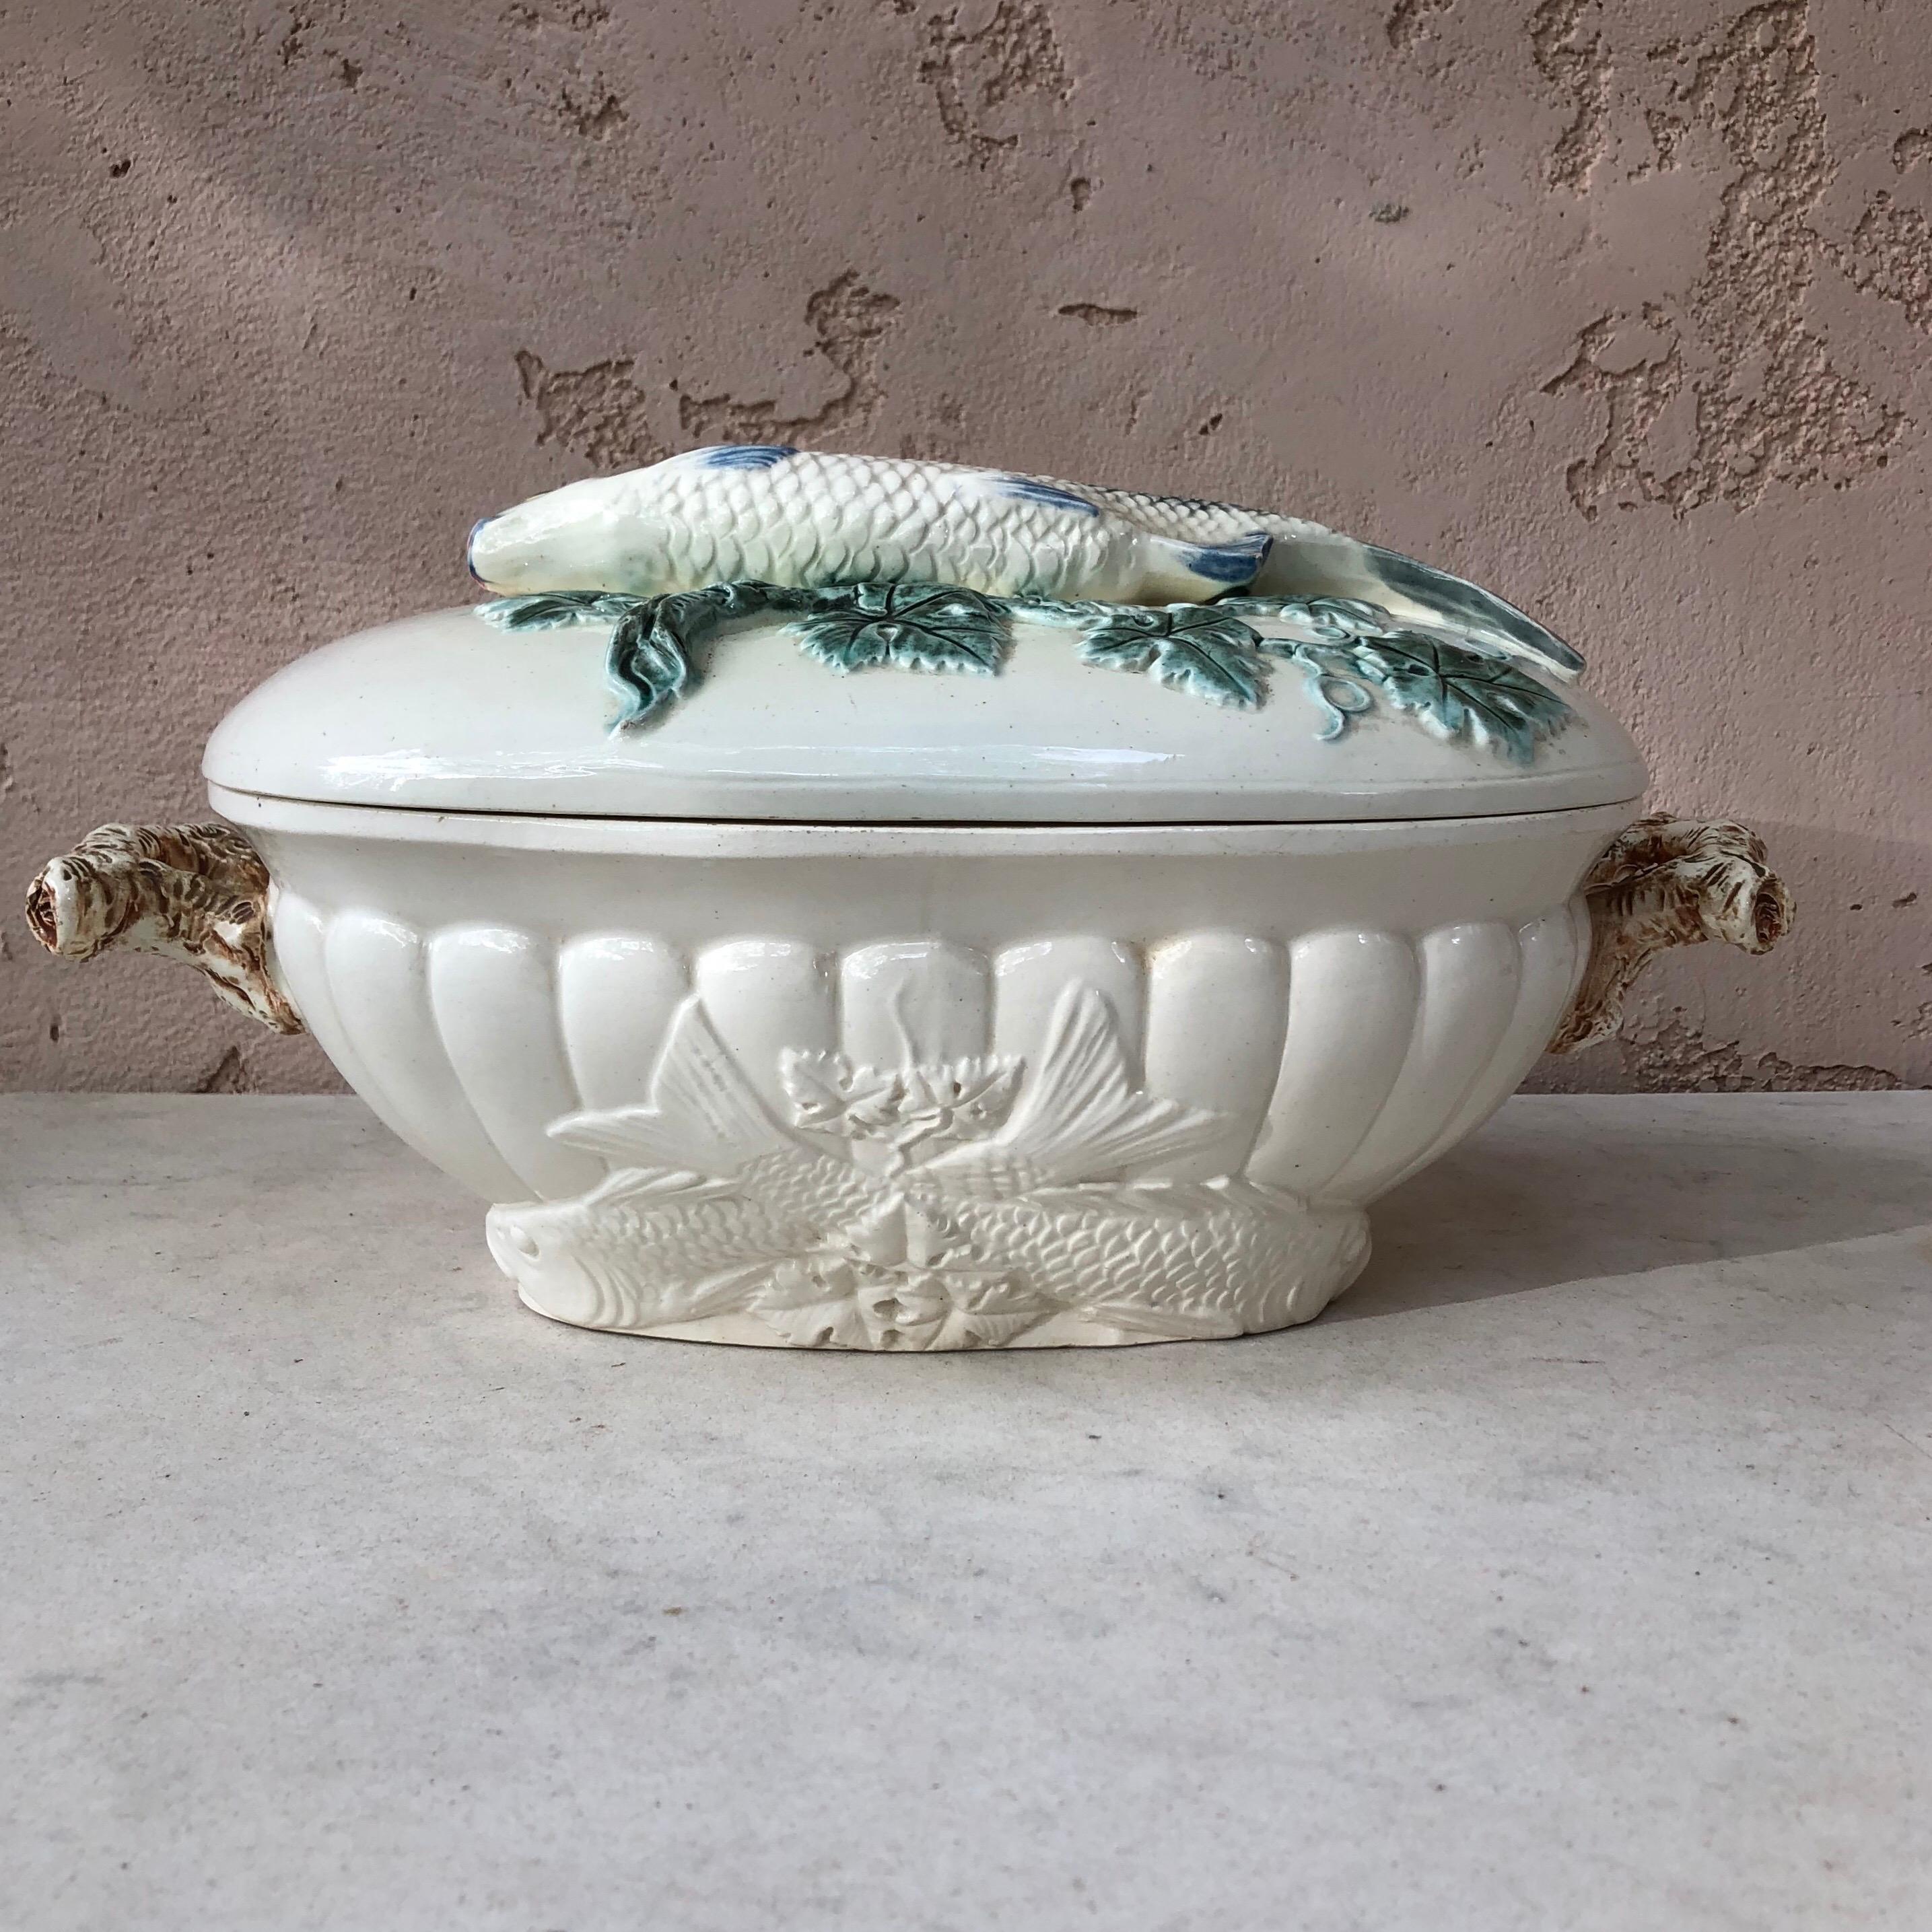 Unusual and rare German Majolica tureen with a fish and leaves on the lid signed Krause, circa 1890.